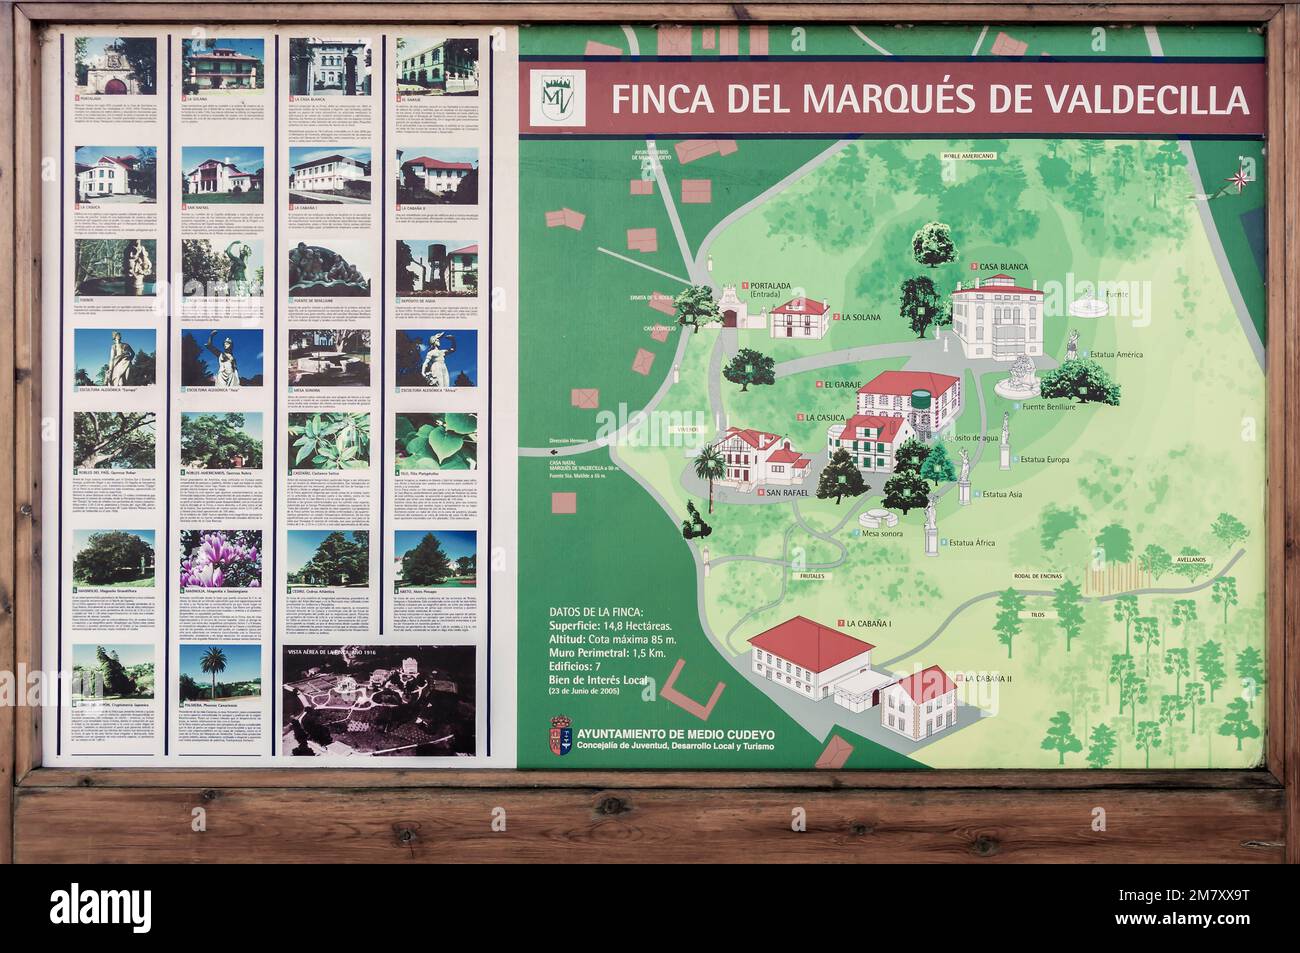 Table with the map of the Marqués de Valdecilla farm and museum, Medio Cudeyo, municipality of the Trasmiera region in Cantabria, Spain, Europe Stock Photo